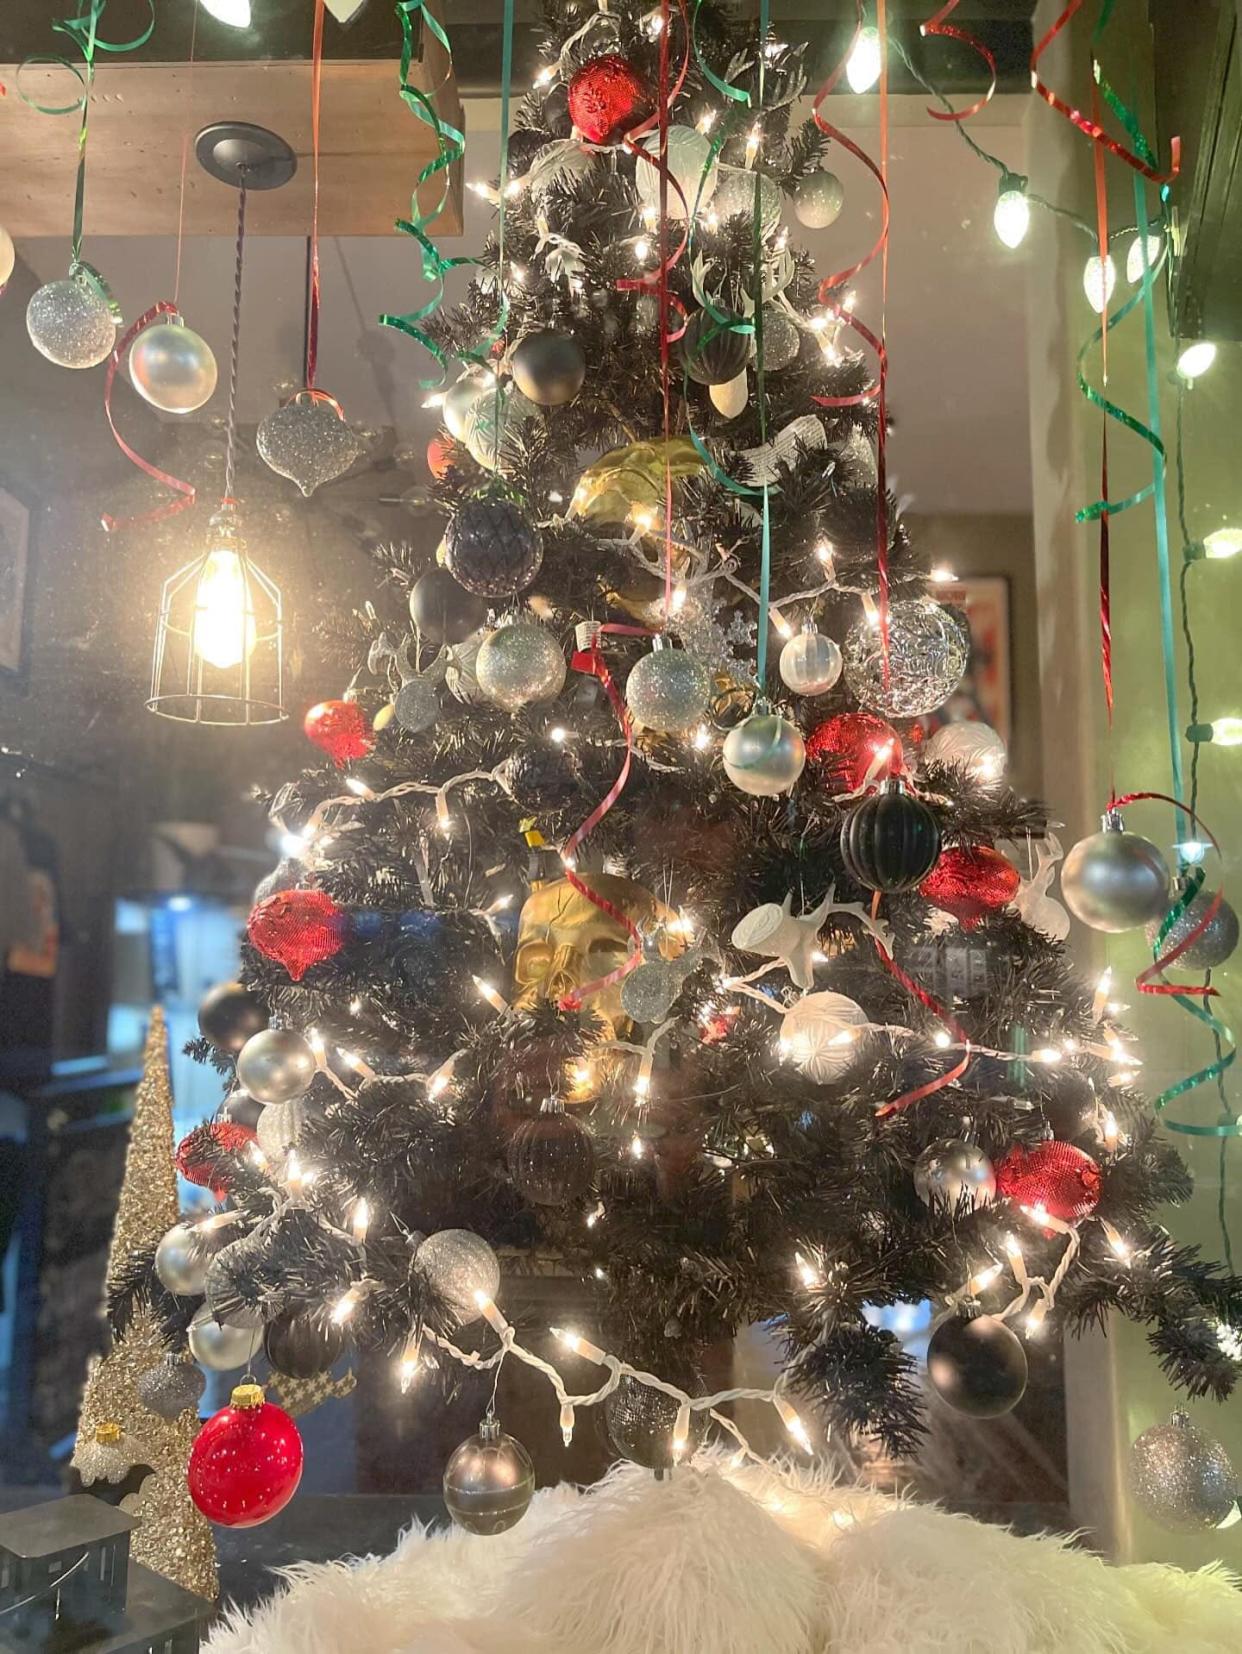 Several businesses across Sault participated in the second annual downtown Christmas decorating contest this year.